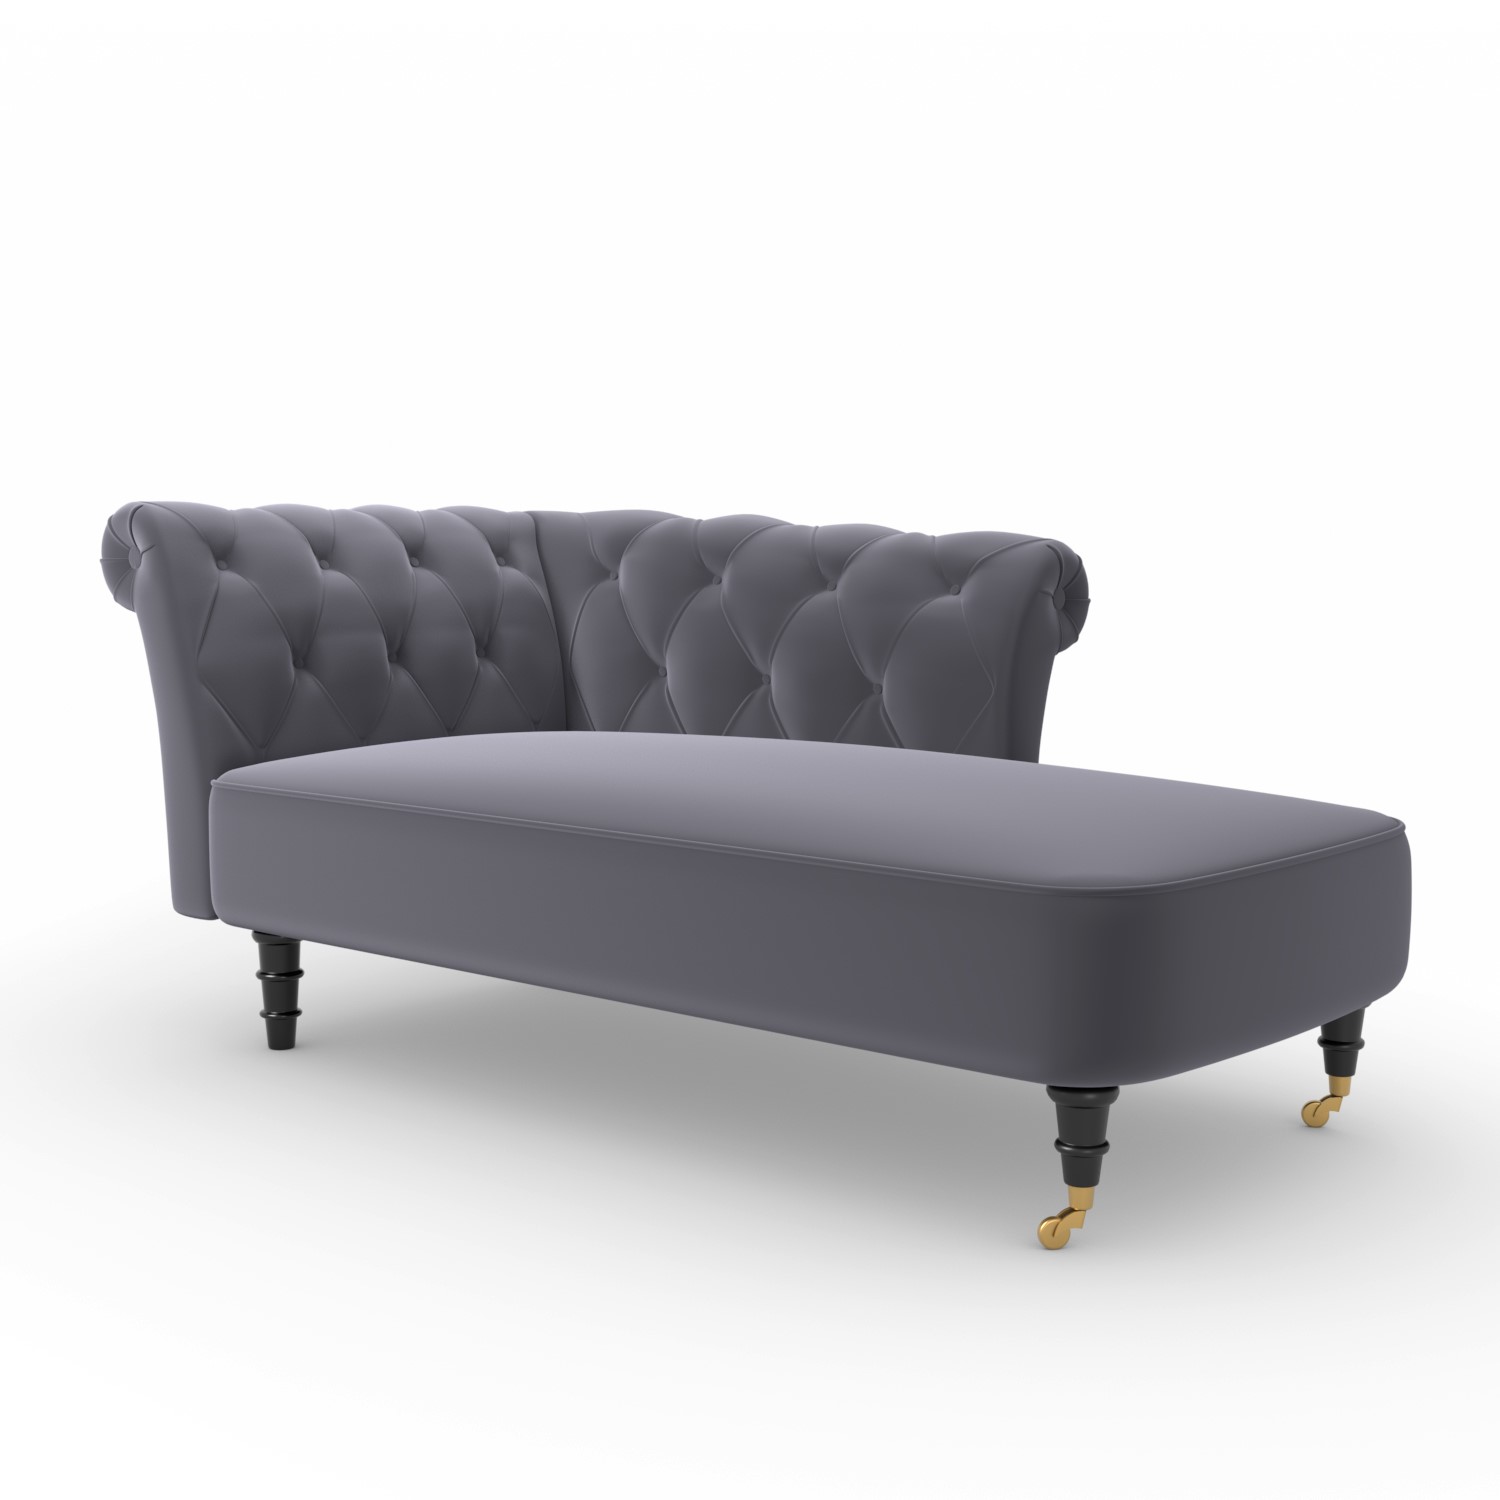 Read more about Dark grey velvet chesterfield chaise lounge chair christiana